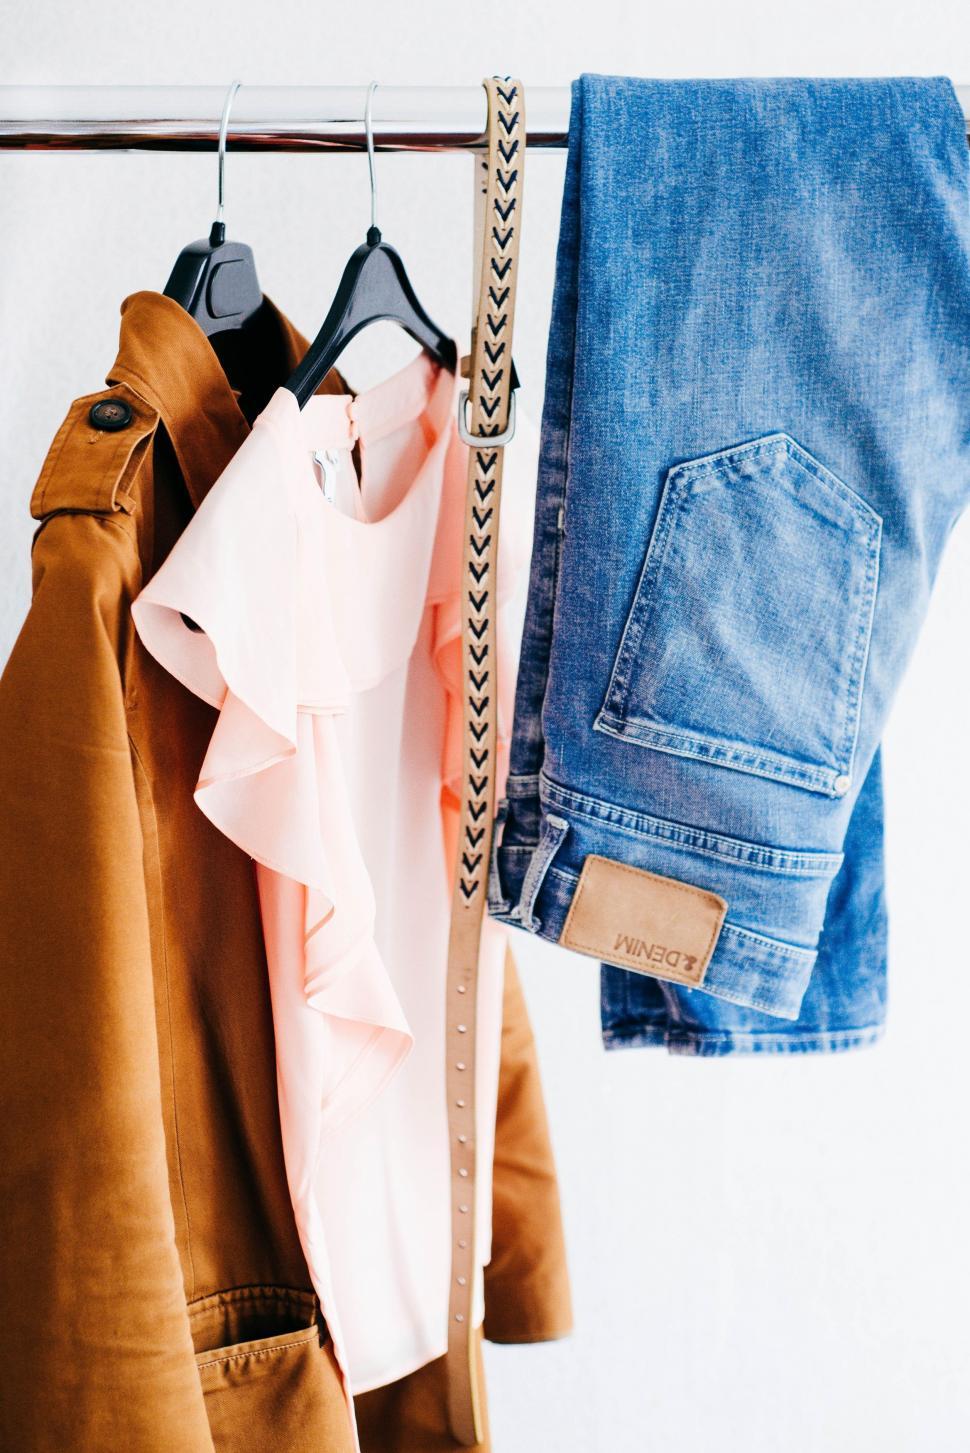 Free Image of Pair of Jeans Hanging on Clothes Rack 